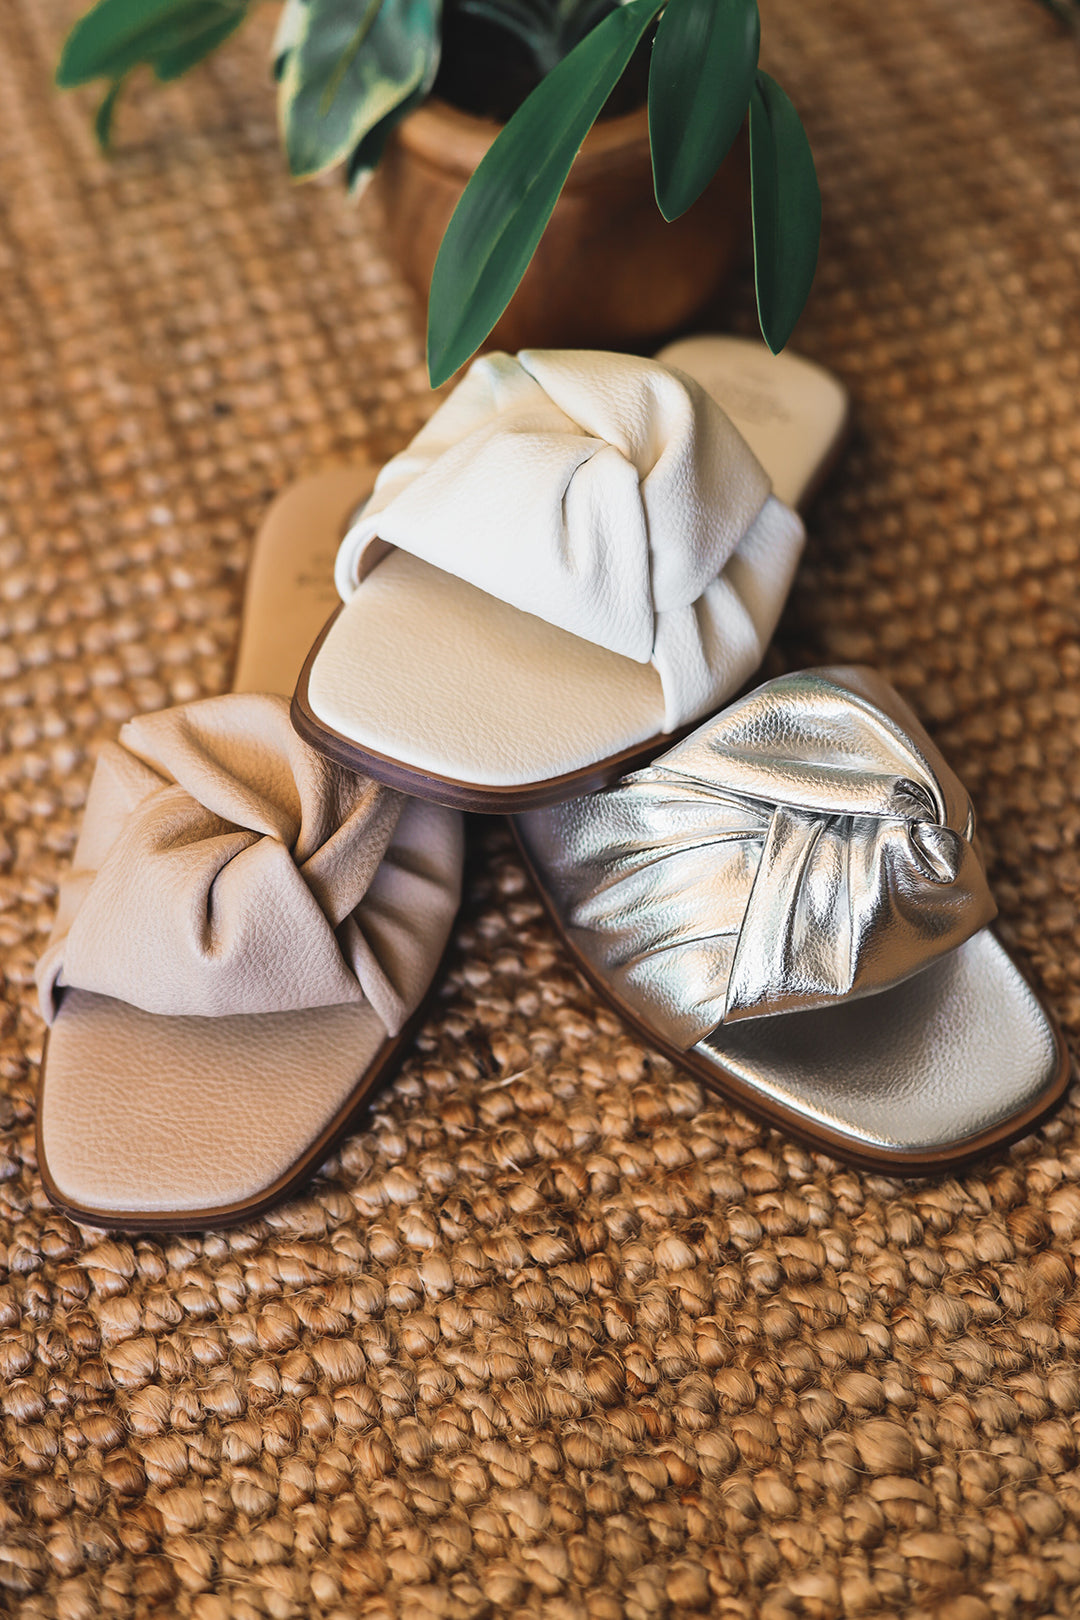 The Alexis Knot Sandals